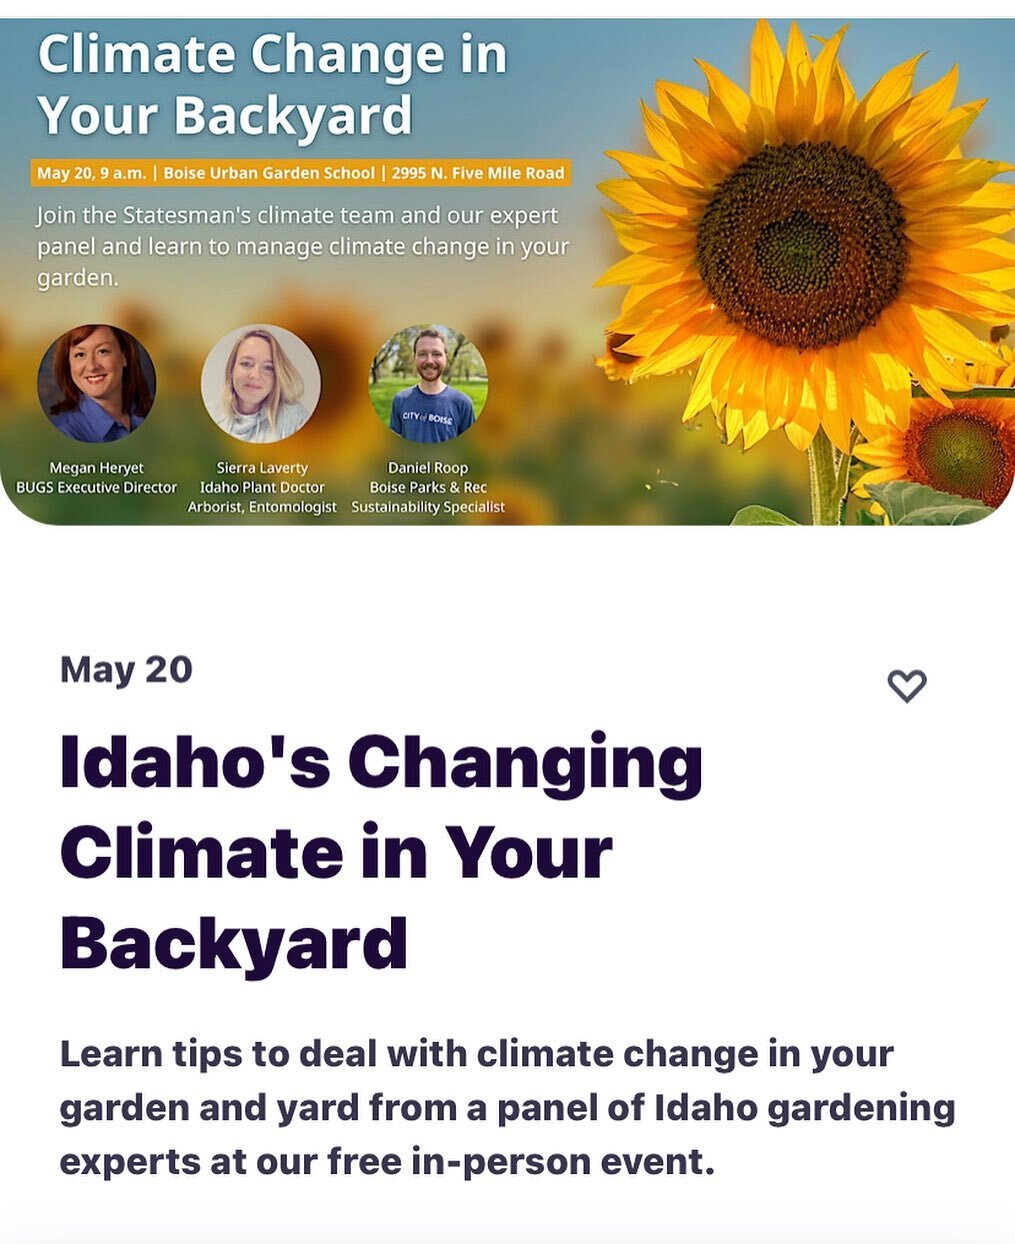 Join the conversation on preparing for climate change in our community at this event with #idahostatesman. https://www.idahostatesman.com/living/home-garden/article275023551.html